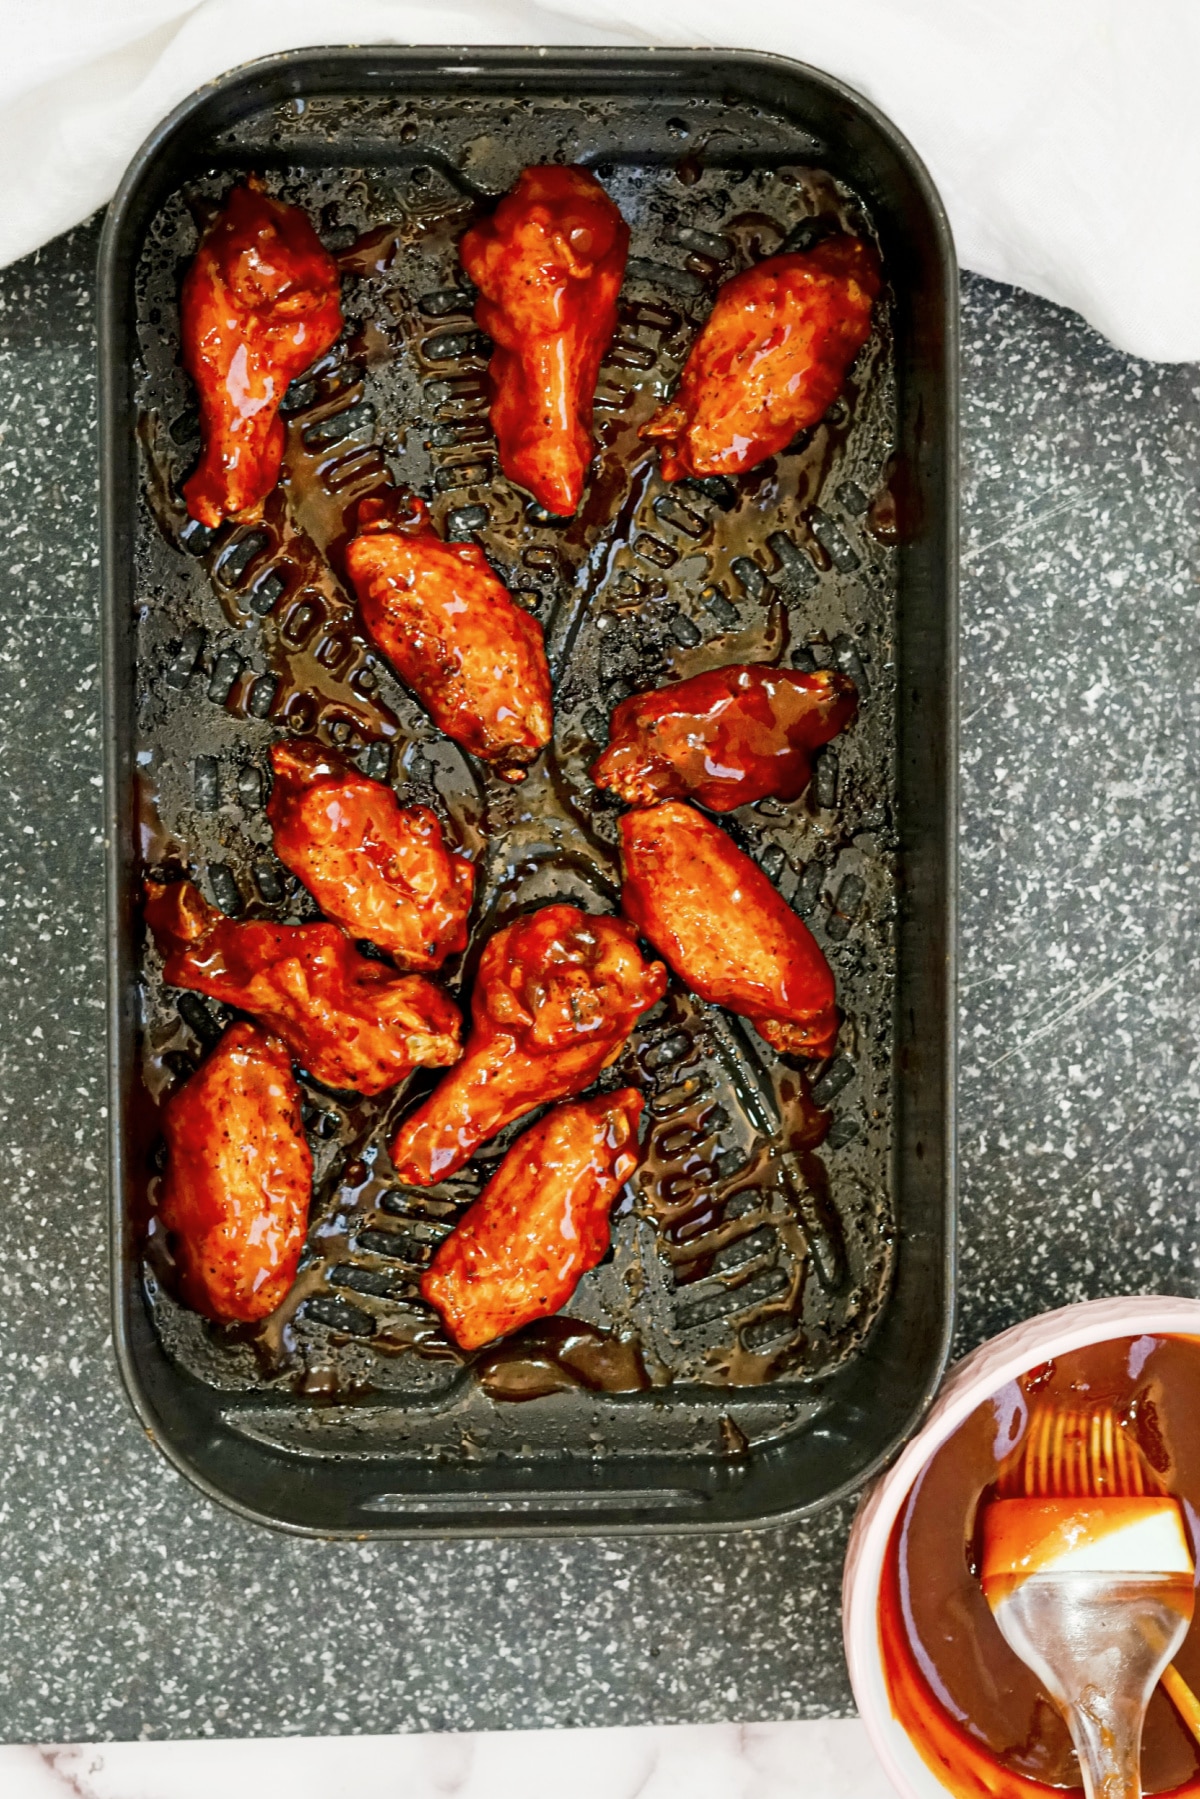 add sauce to wings